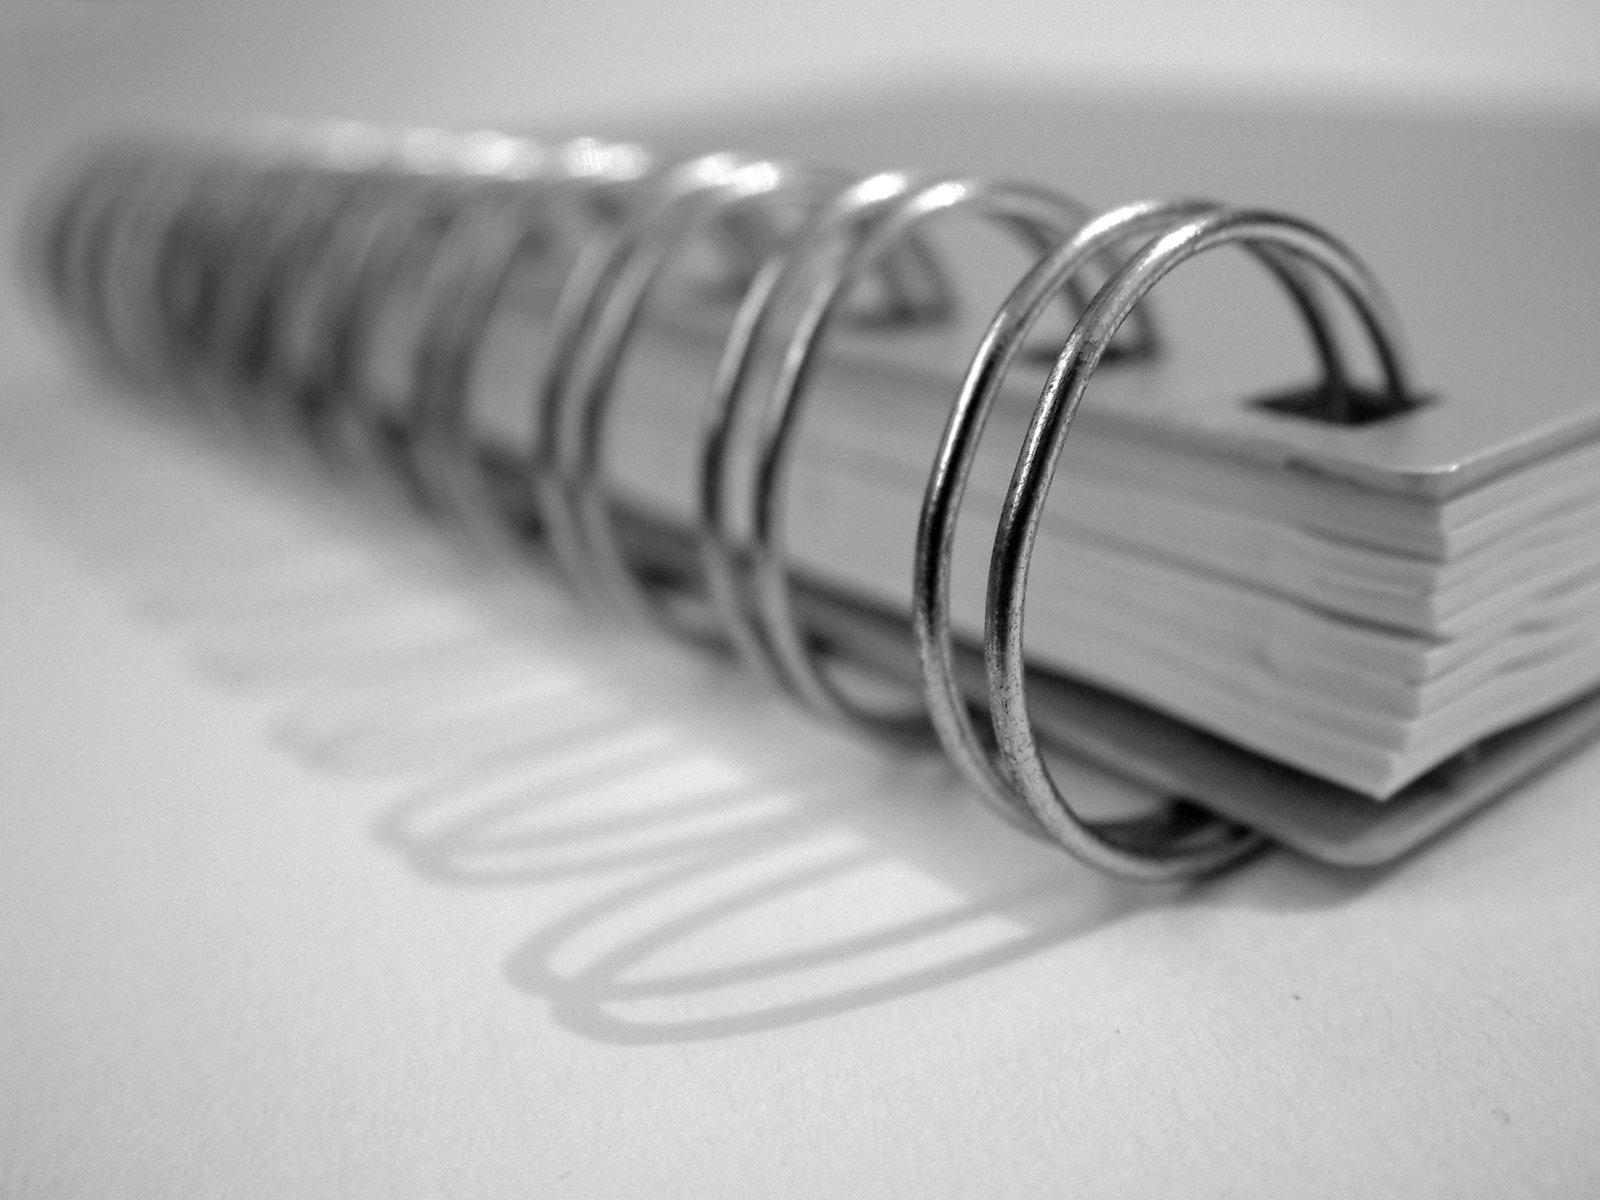 an open spiral metal book on white paper